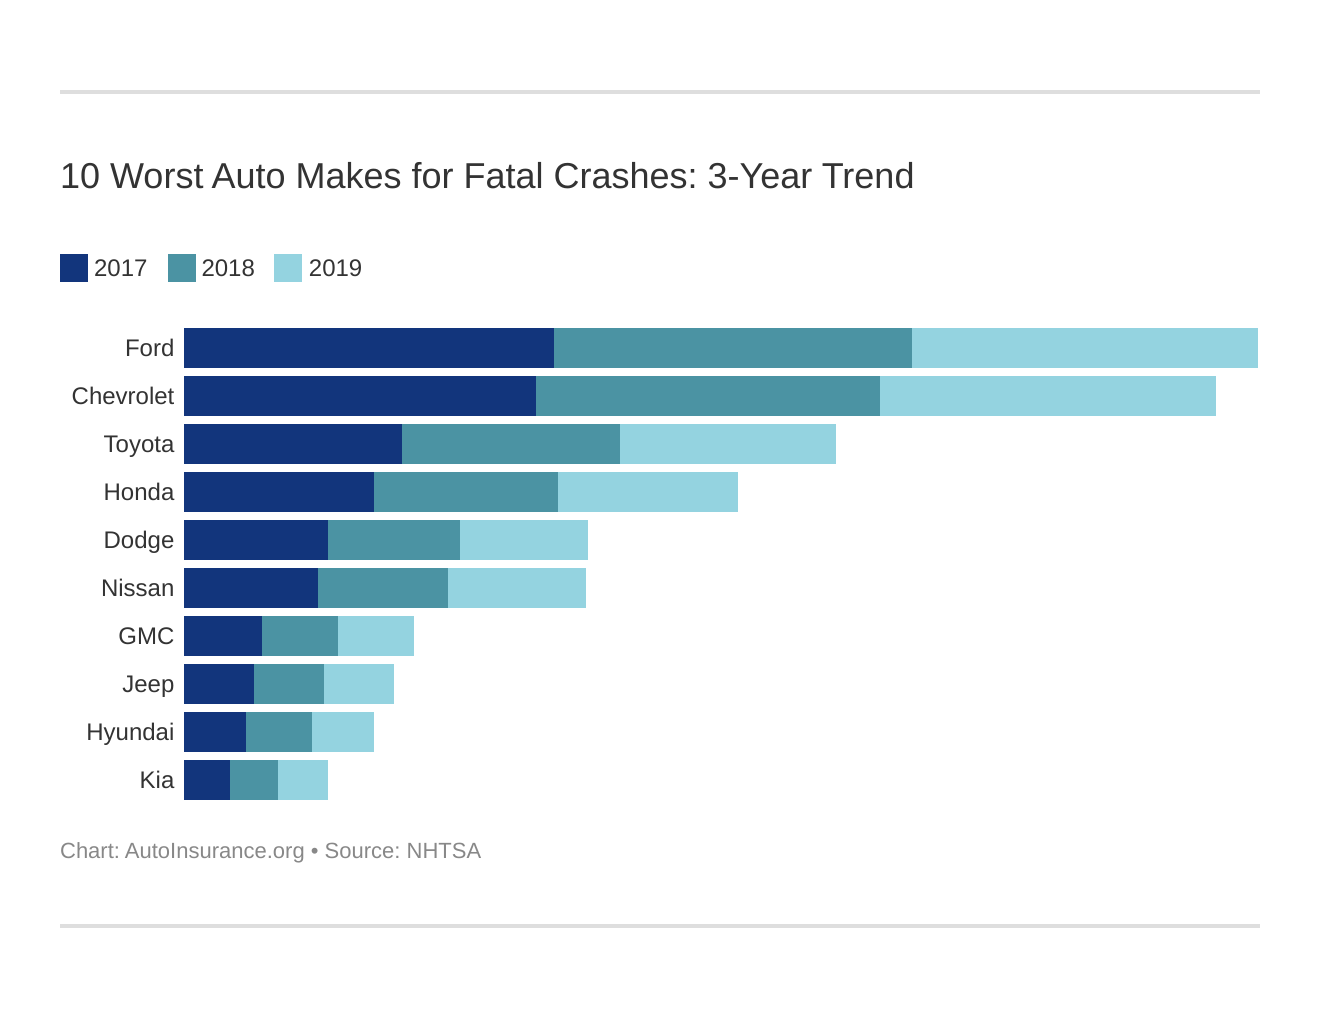 10 Worst Auto Makes for Fatal Crashes: 3-Year Trend